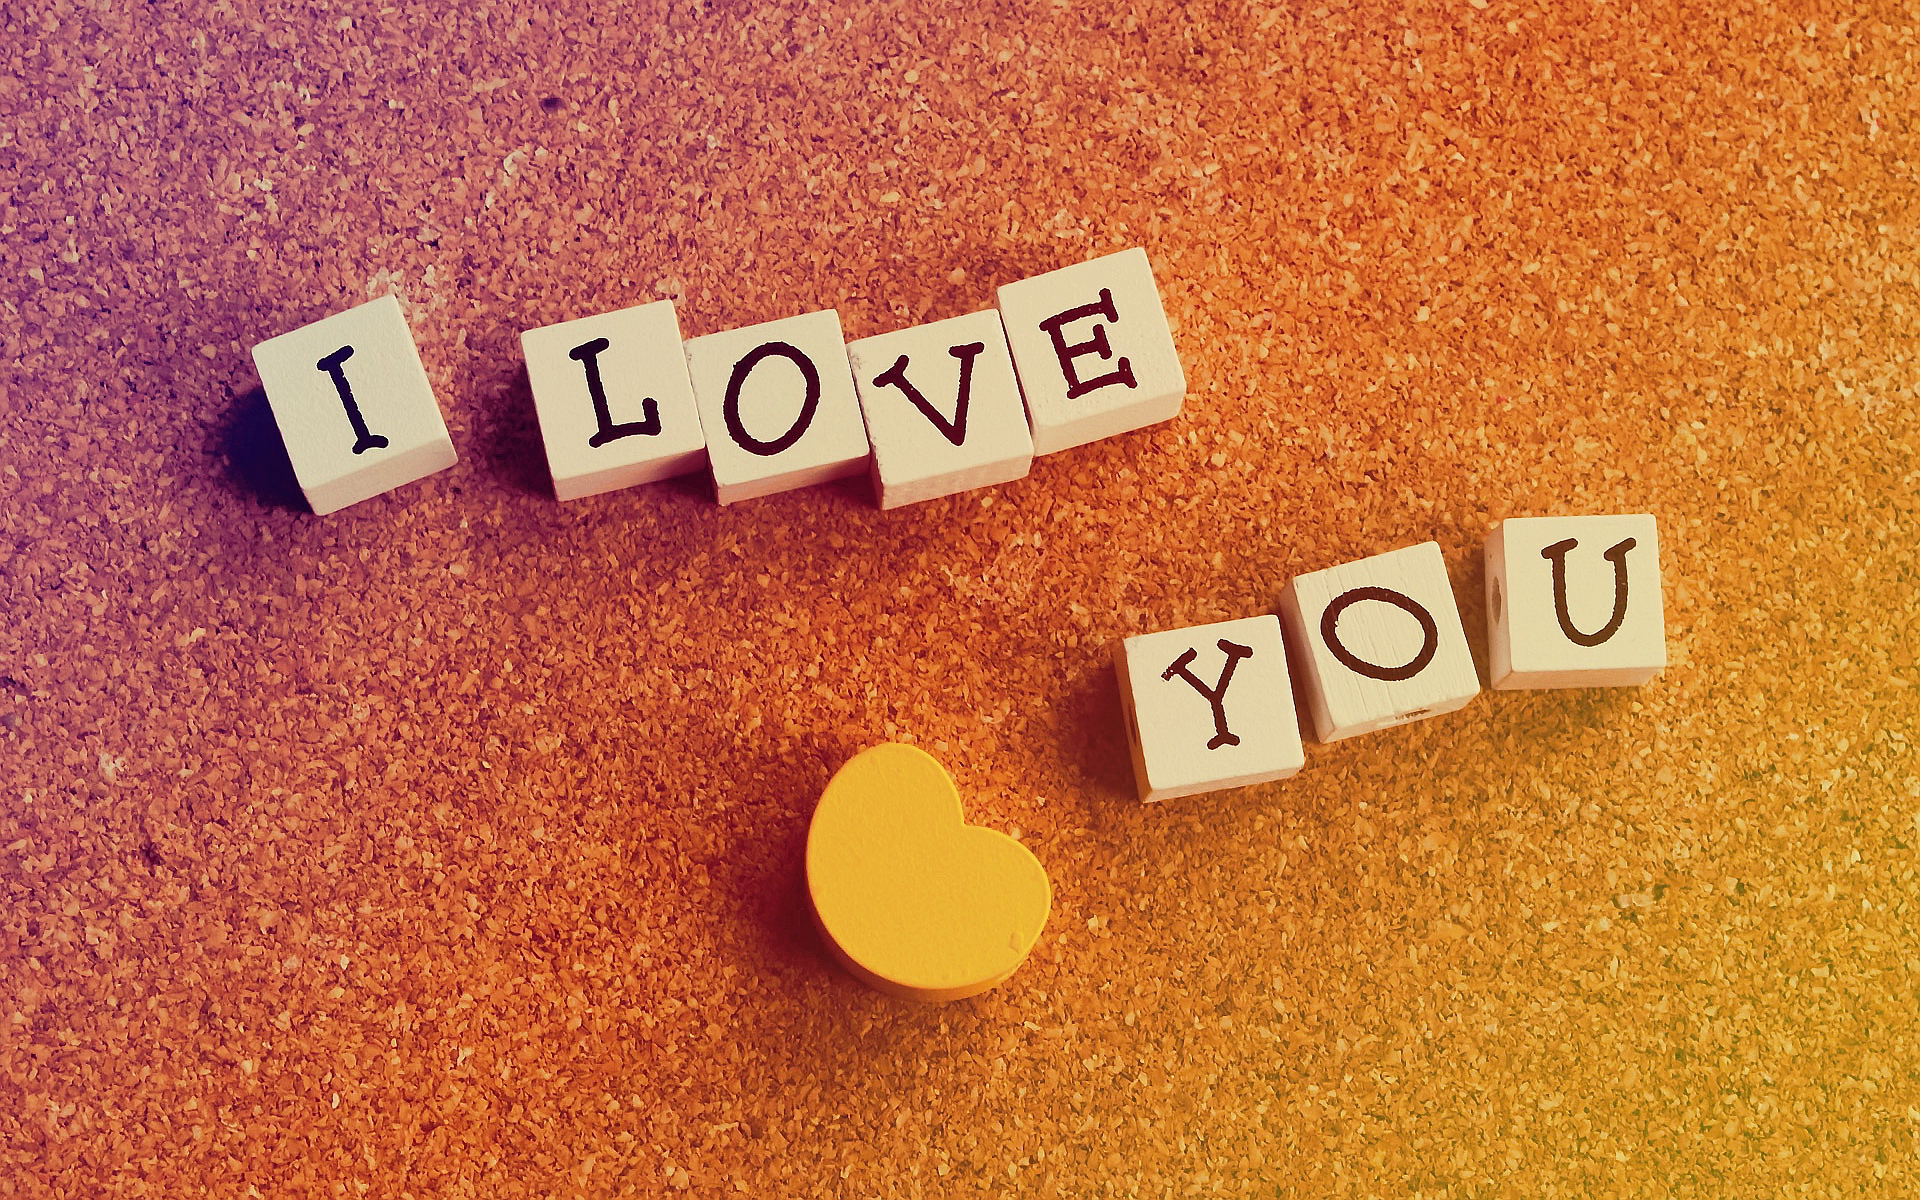 I love you wallpapers hd